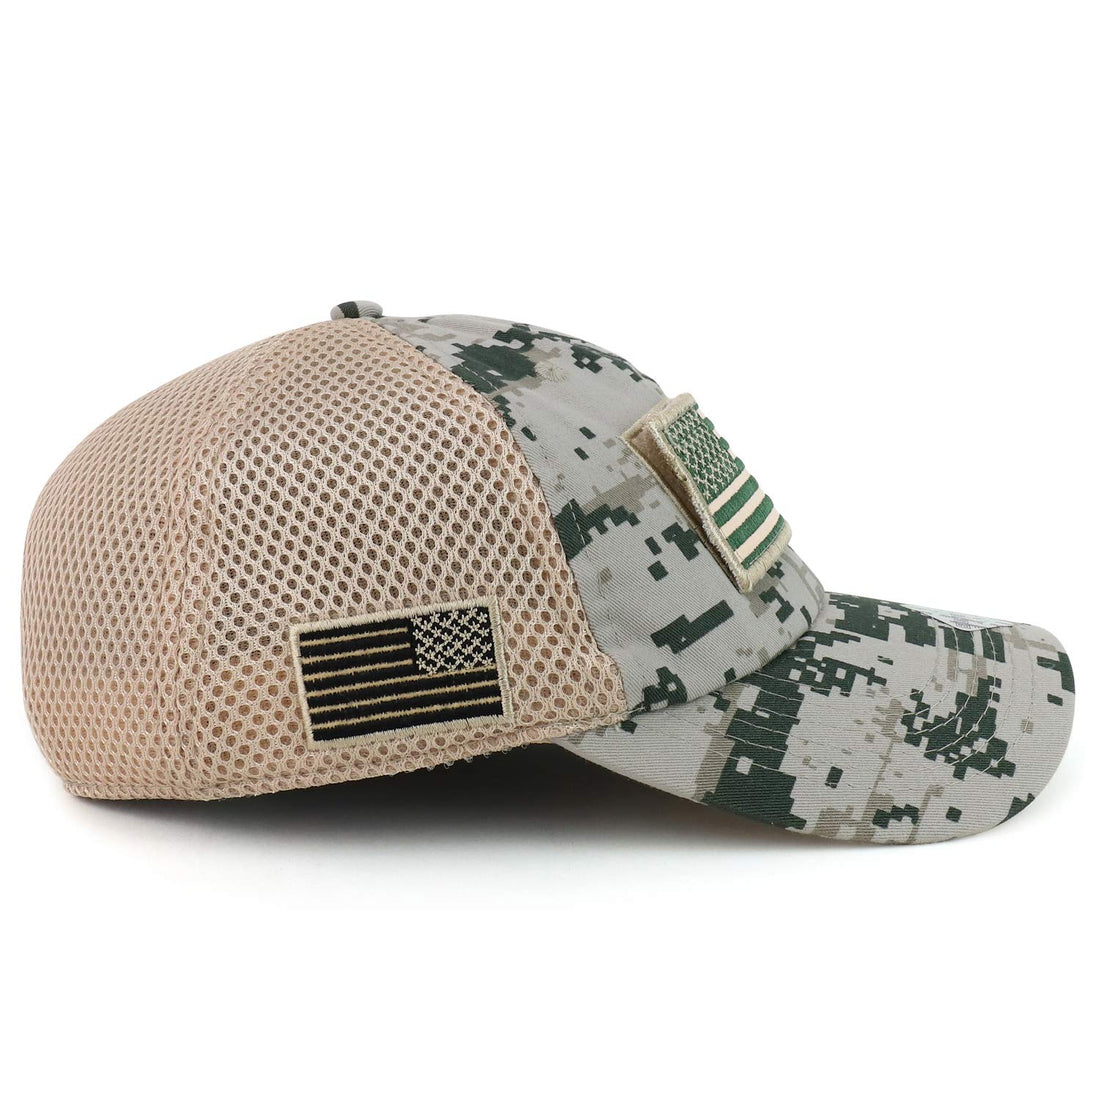 Trendy Apparel Shop Removable Hook and Loop USA Flag Patch Air Mesh Baseball Cap